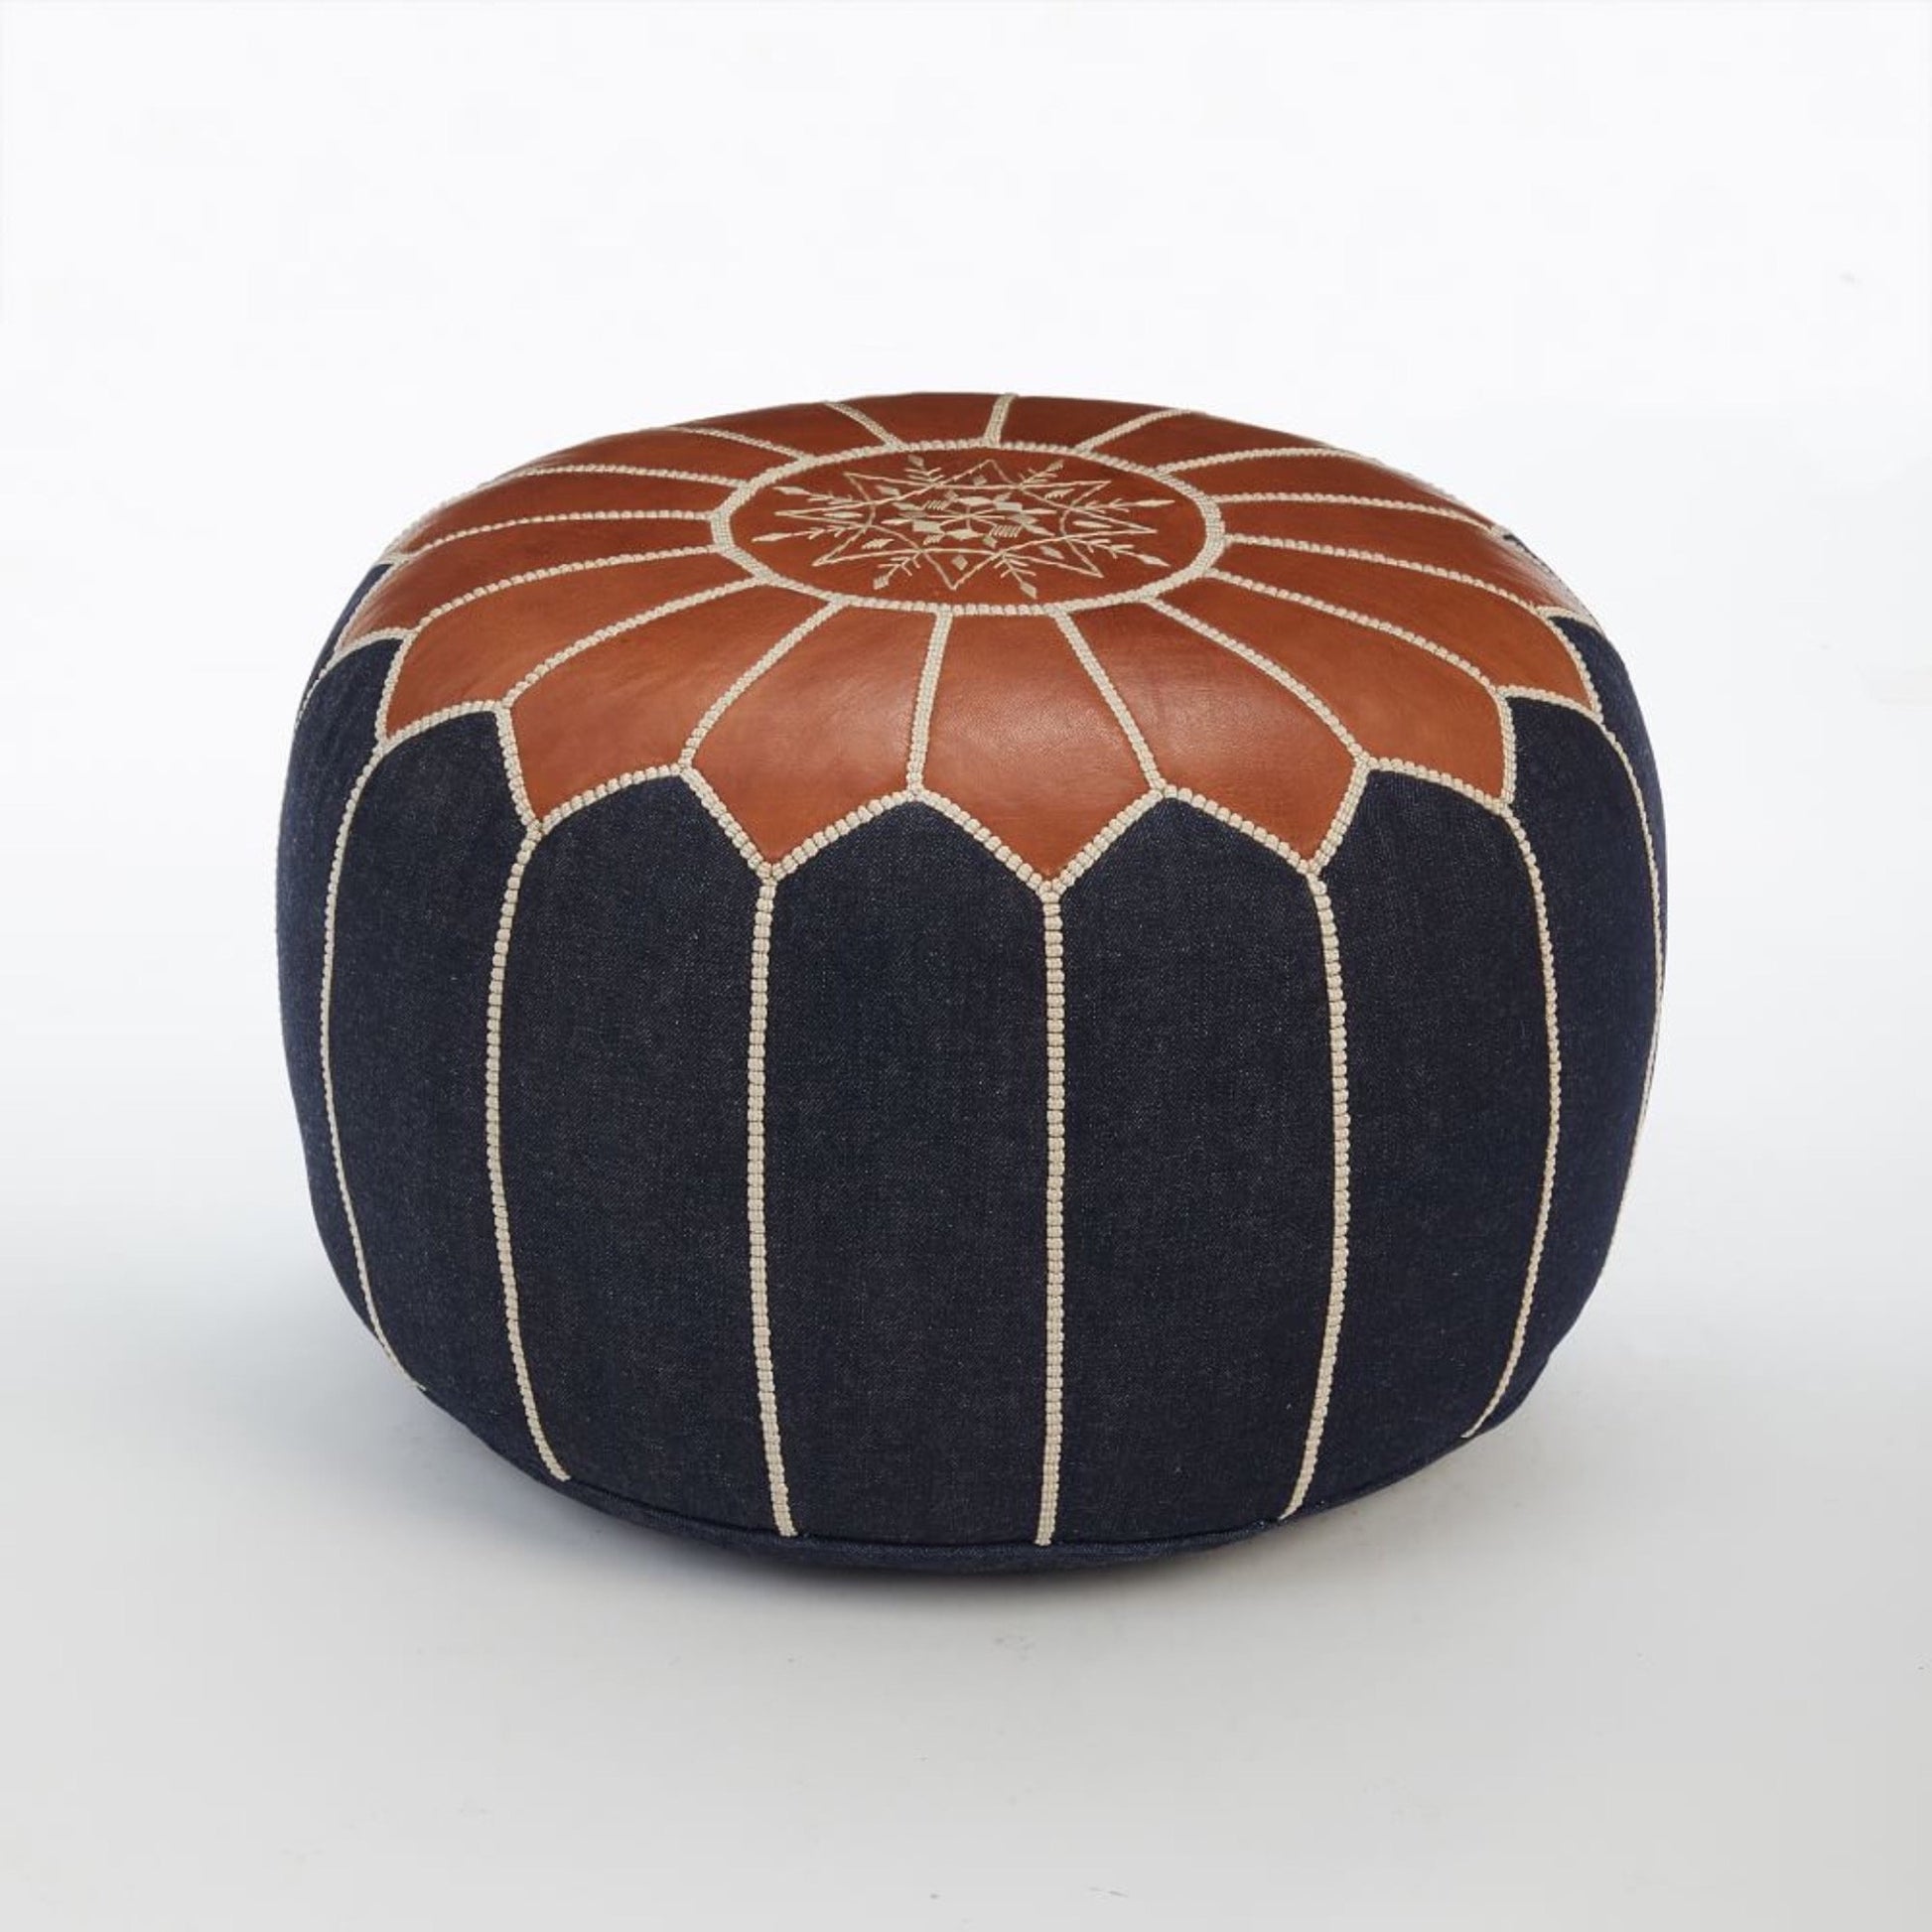 Fill Leather Pouf From Marrakesh With cloth and polyester ball